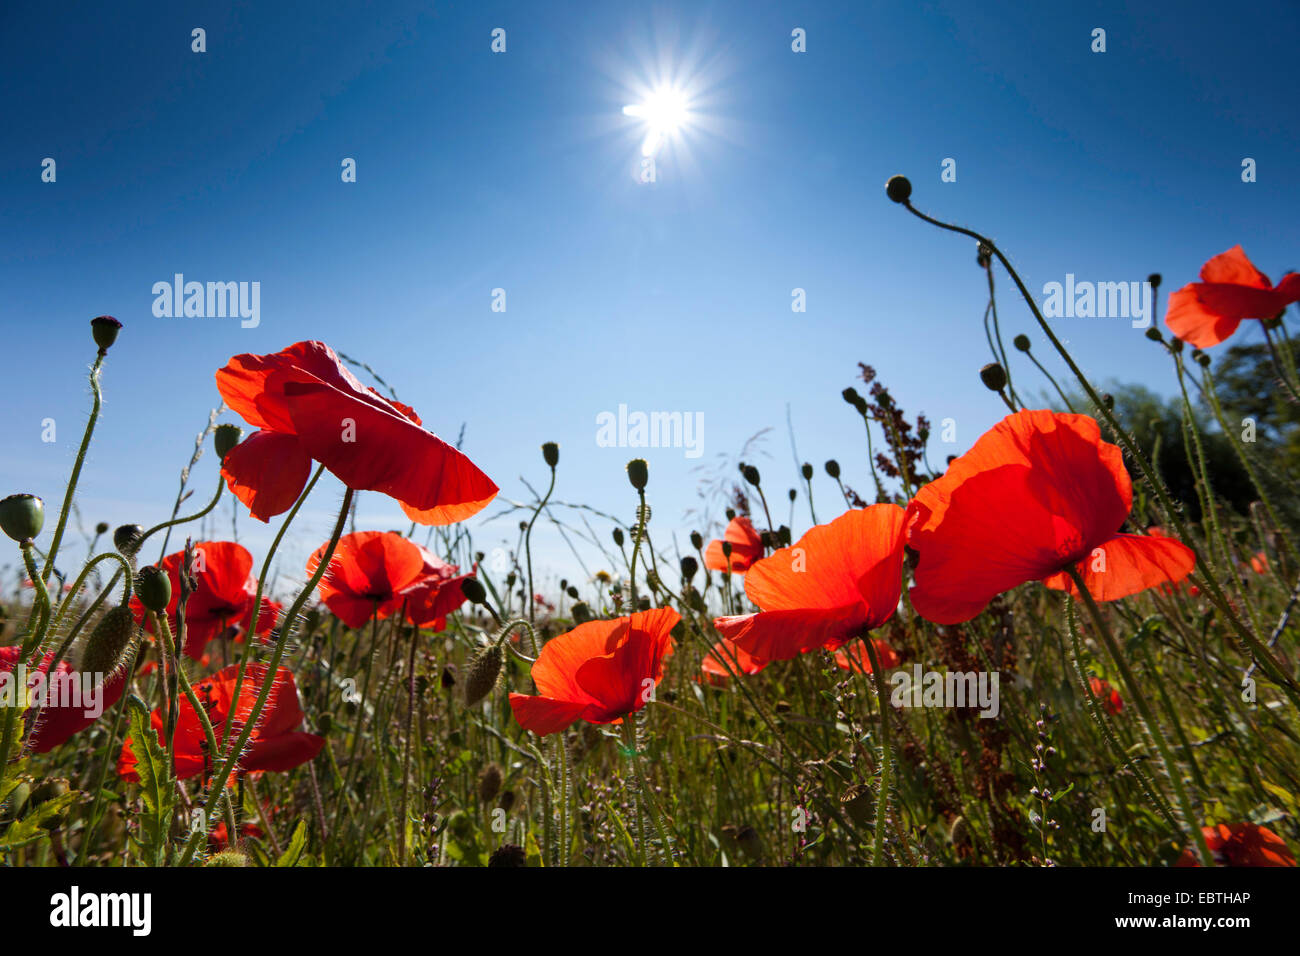 Common poppy, Corn poppy, Red poppy (Papaver rhoeas), view at the sun from out ao a meadow with blooming poppy, Germany, Mecklenburg-Western Pomerania Stock Photo